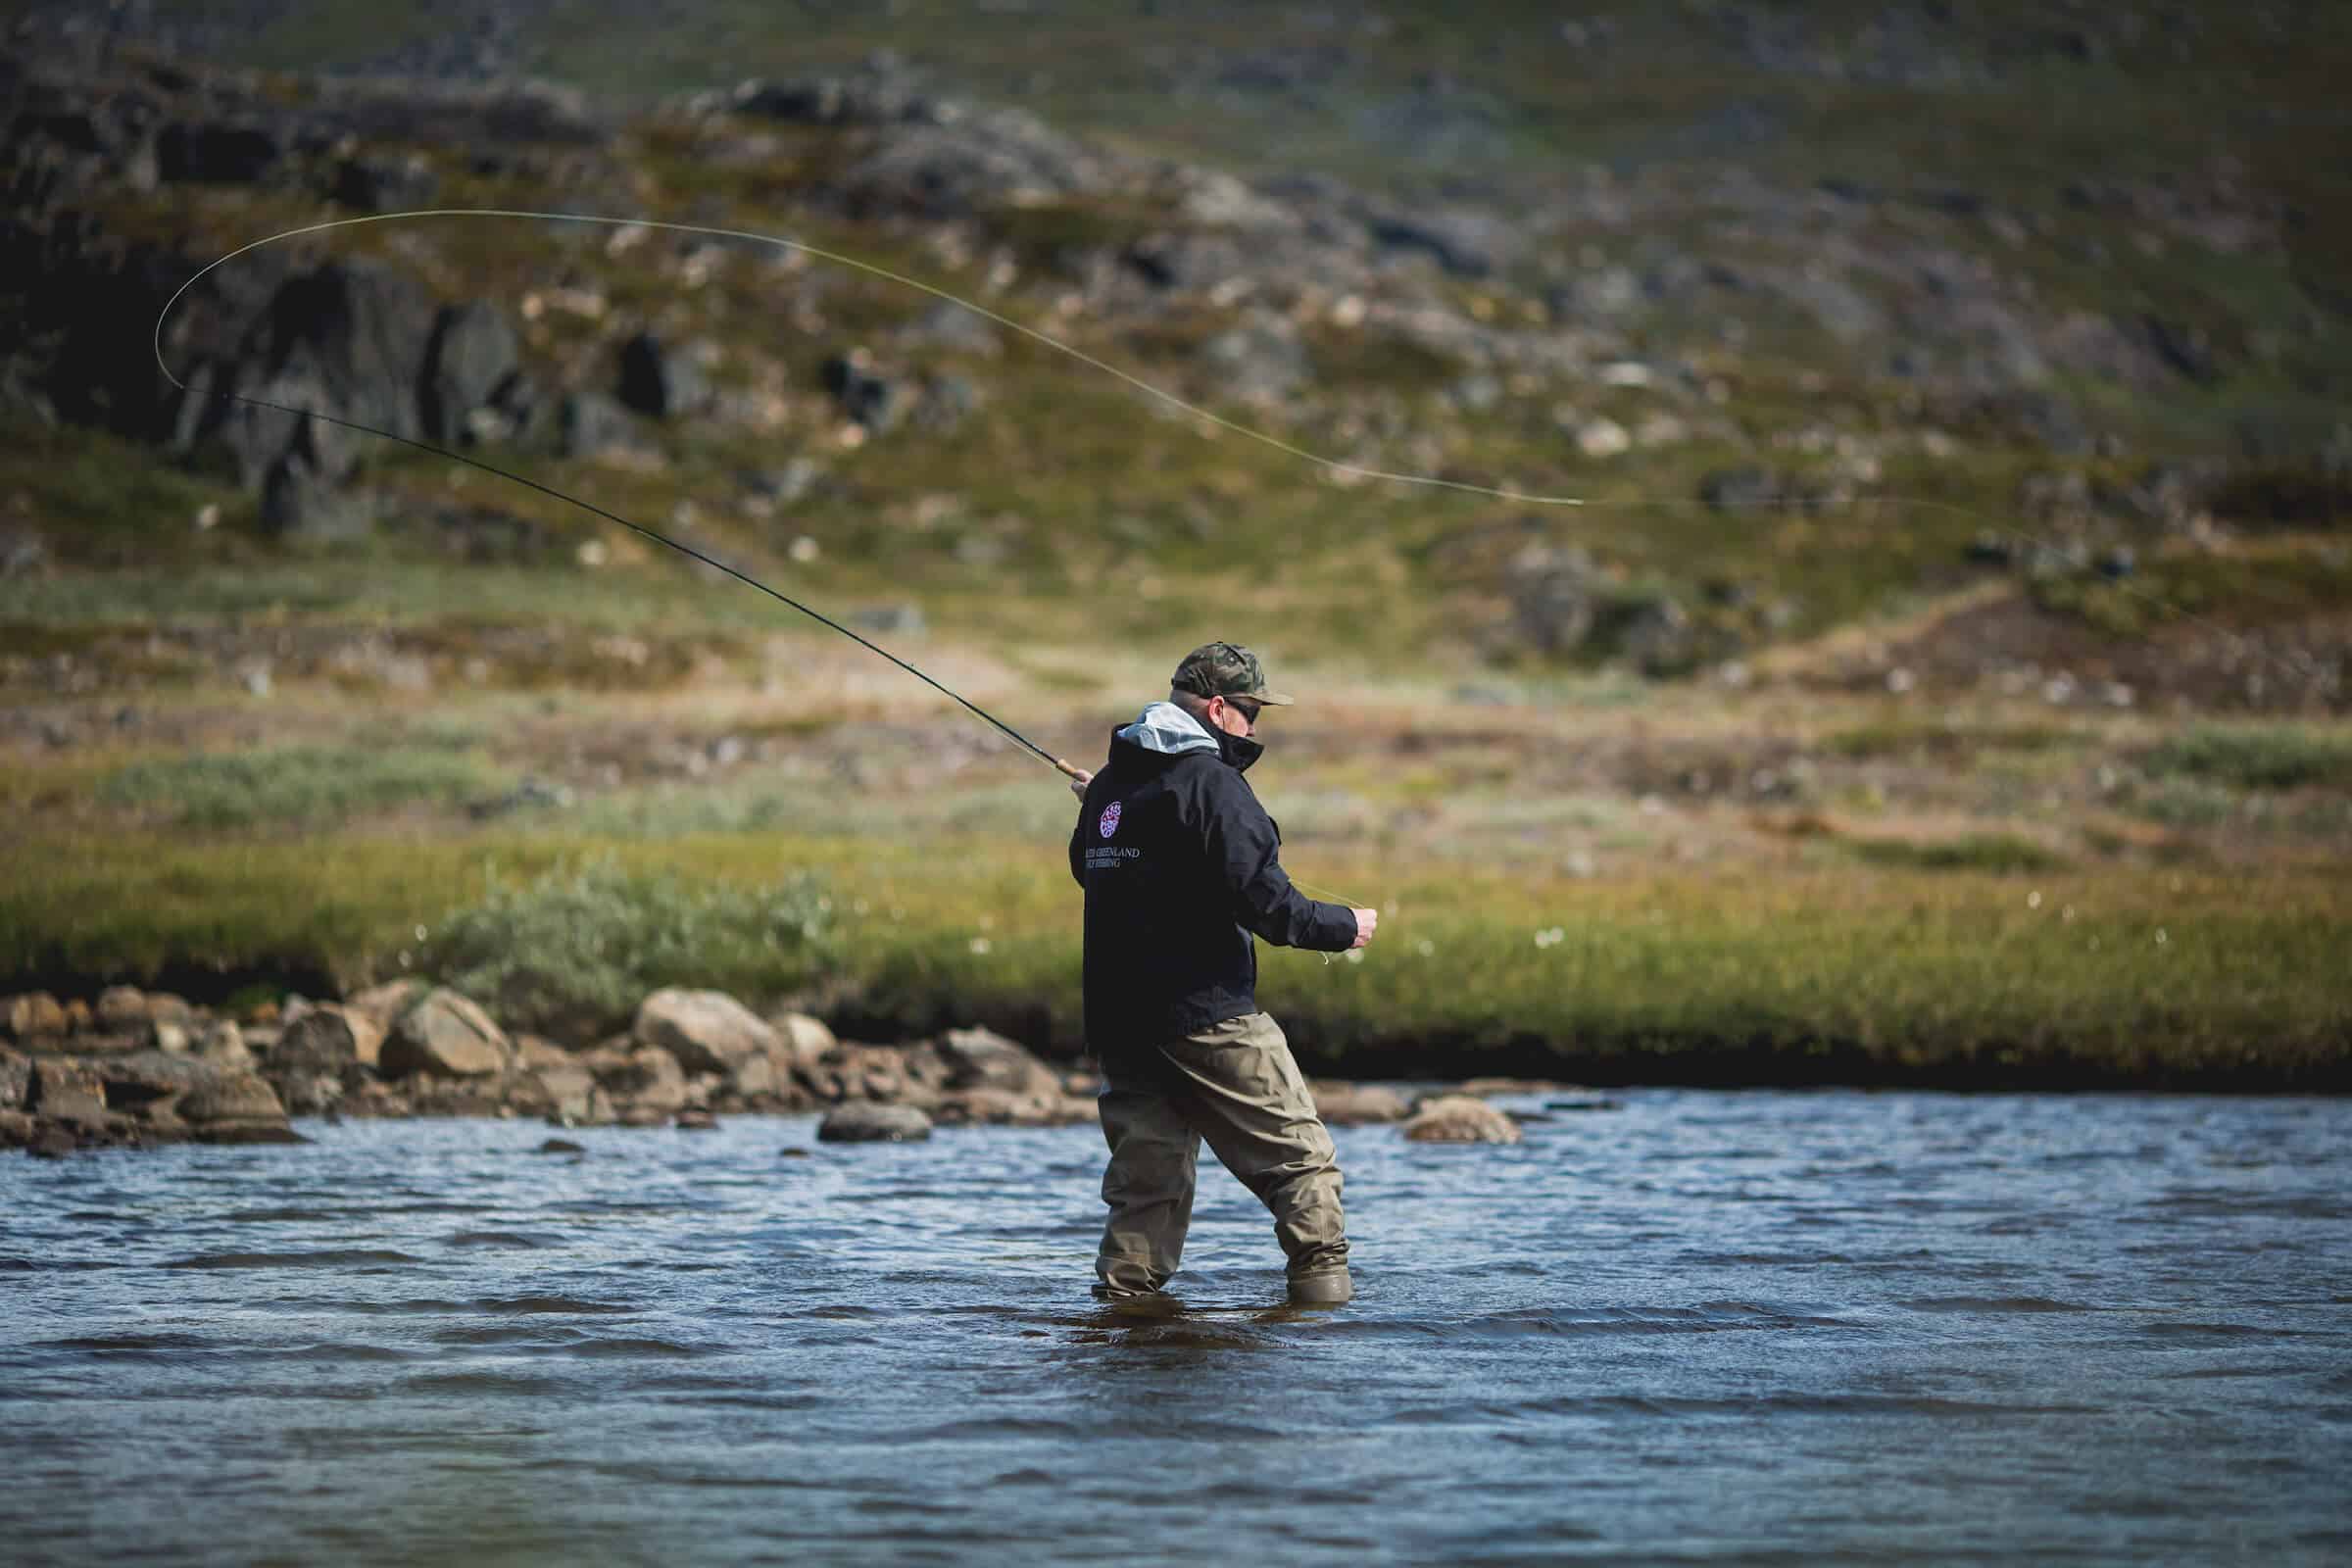 A Guide from South Greenland fly fishing in the Narsaq backcountry. Photo by Mads Pihl